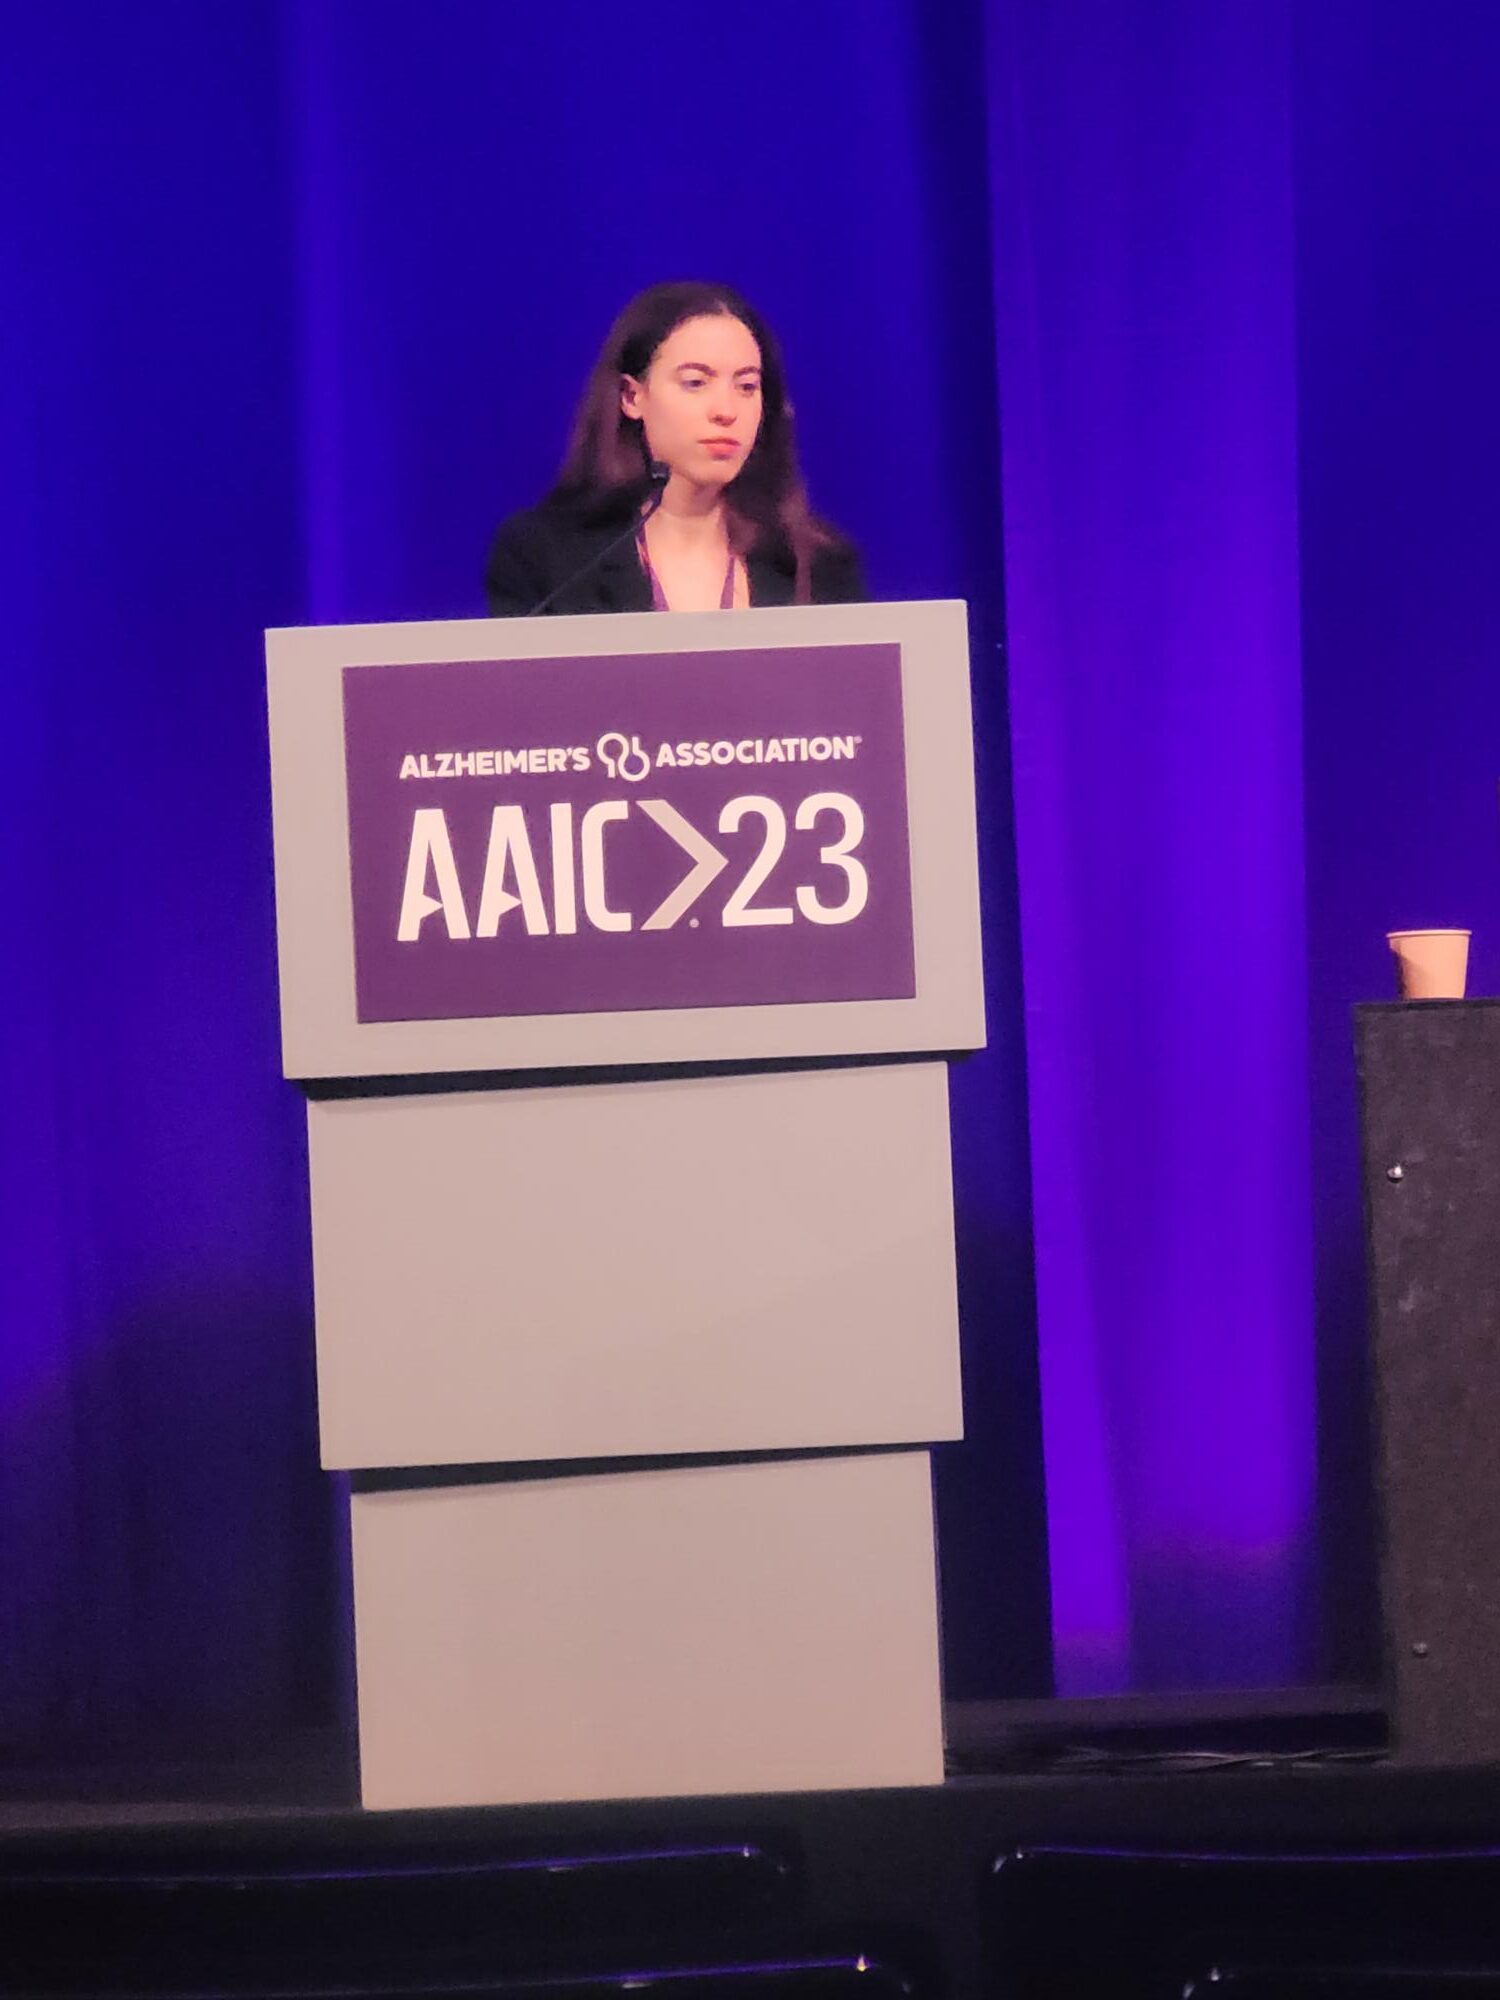 PhD Students and Trainees at AAIC 2023 In Amsterdam Jun Lab